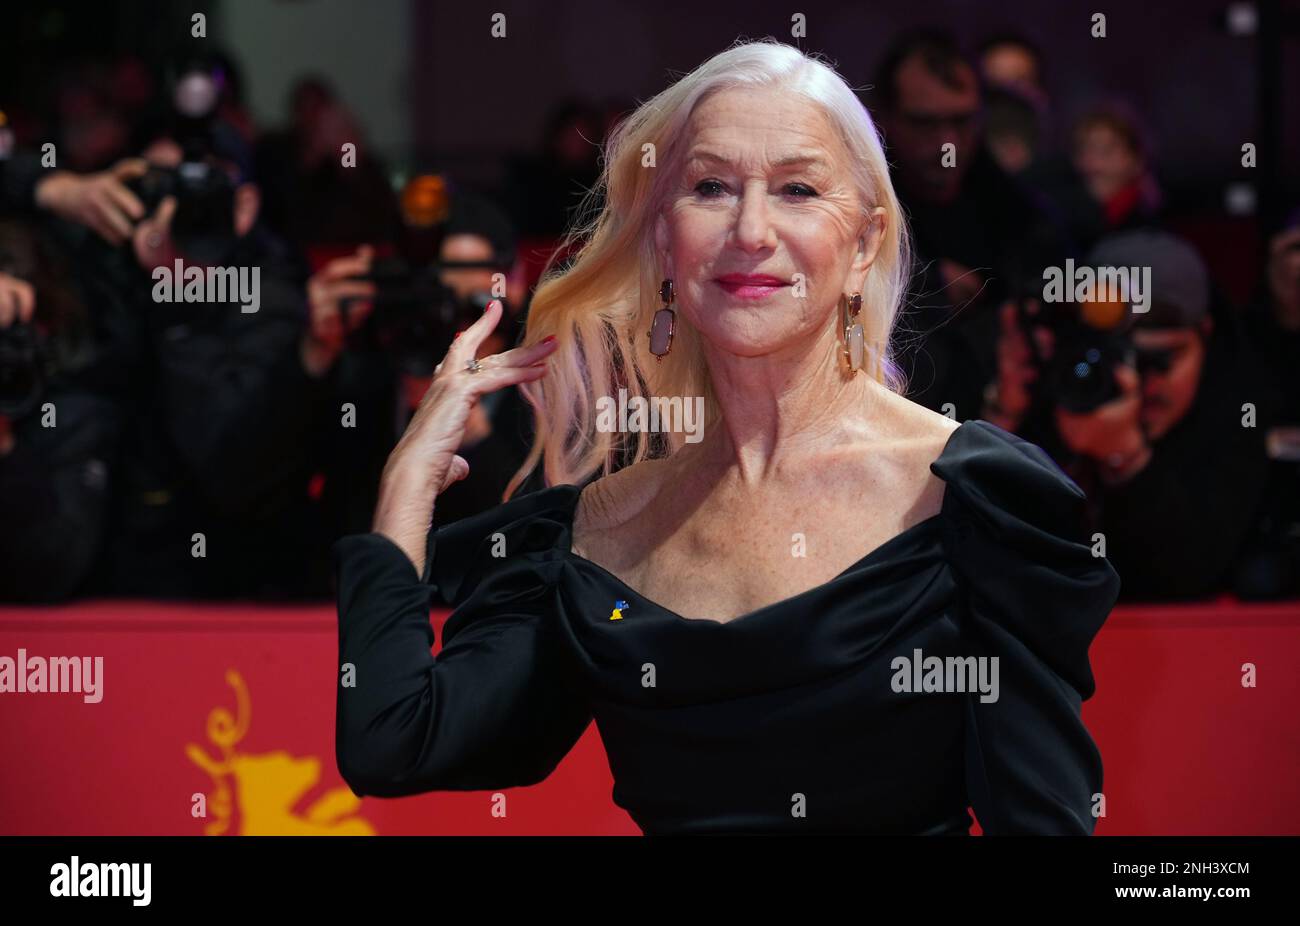 https://c8.alamy.com/comp/2NH3XCM/berlin-germany-20th-feb-2023-helen-mirren-arrives-at-the-berlinale-for-the-screening-of-her-new-film-golda-in-it-she-plays-the-israeli-politician-golda-meir-the-73rd-international-film-festival-will-take-place-in-berlin-from-feb-16-26-2023-credit-soeren-stachedpaalamy-live-news-2NH3XCM.jpg